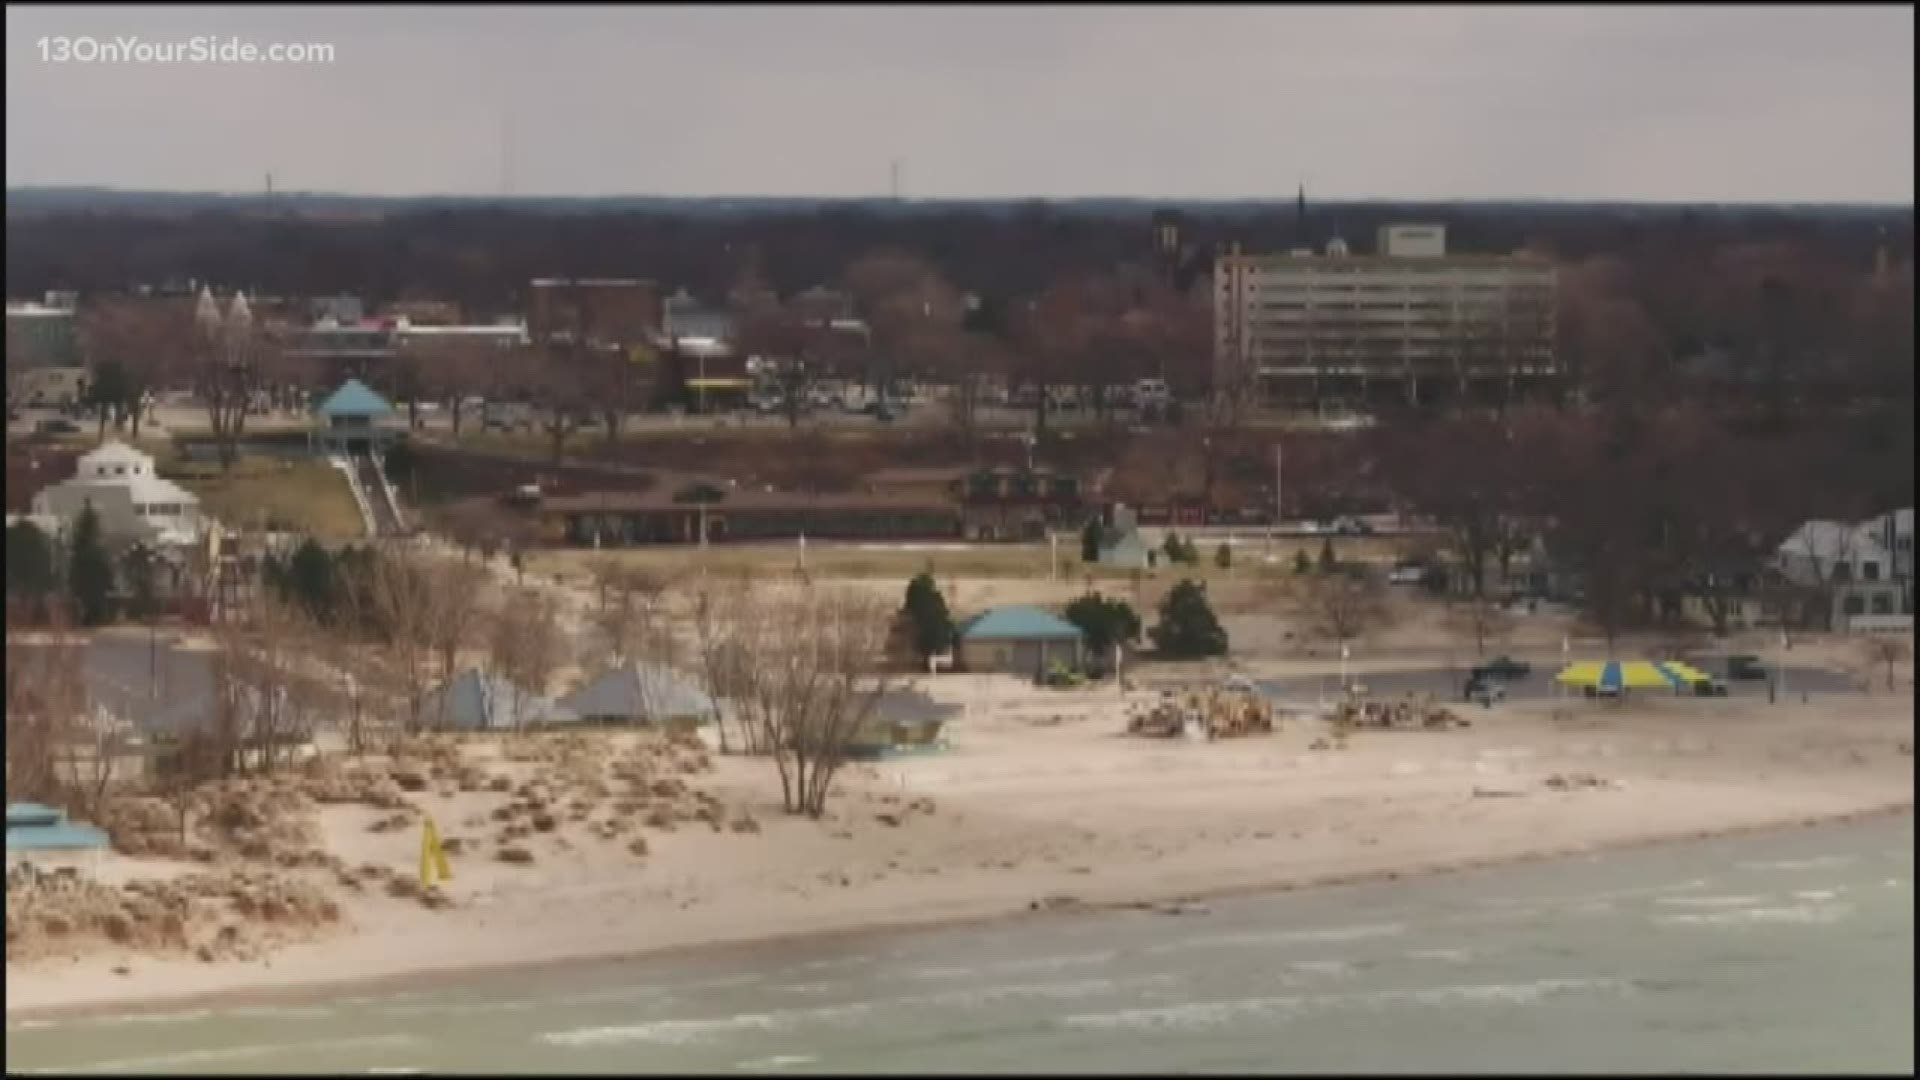 Both U.S. Sen. Debbie Stabenow and U.S. Rep. Fred Upton will get a look at erosion damage along Lake Michigan in South Haven.